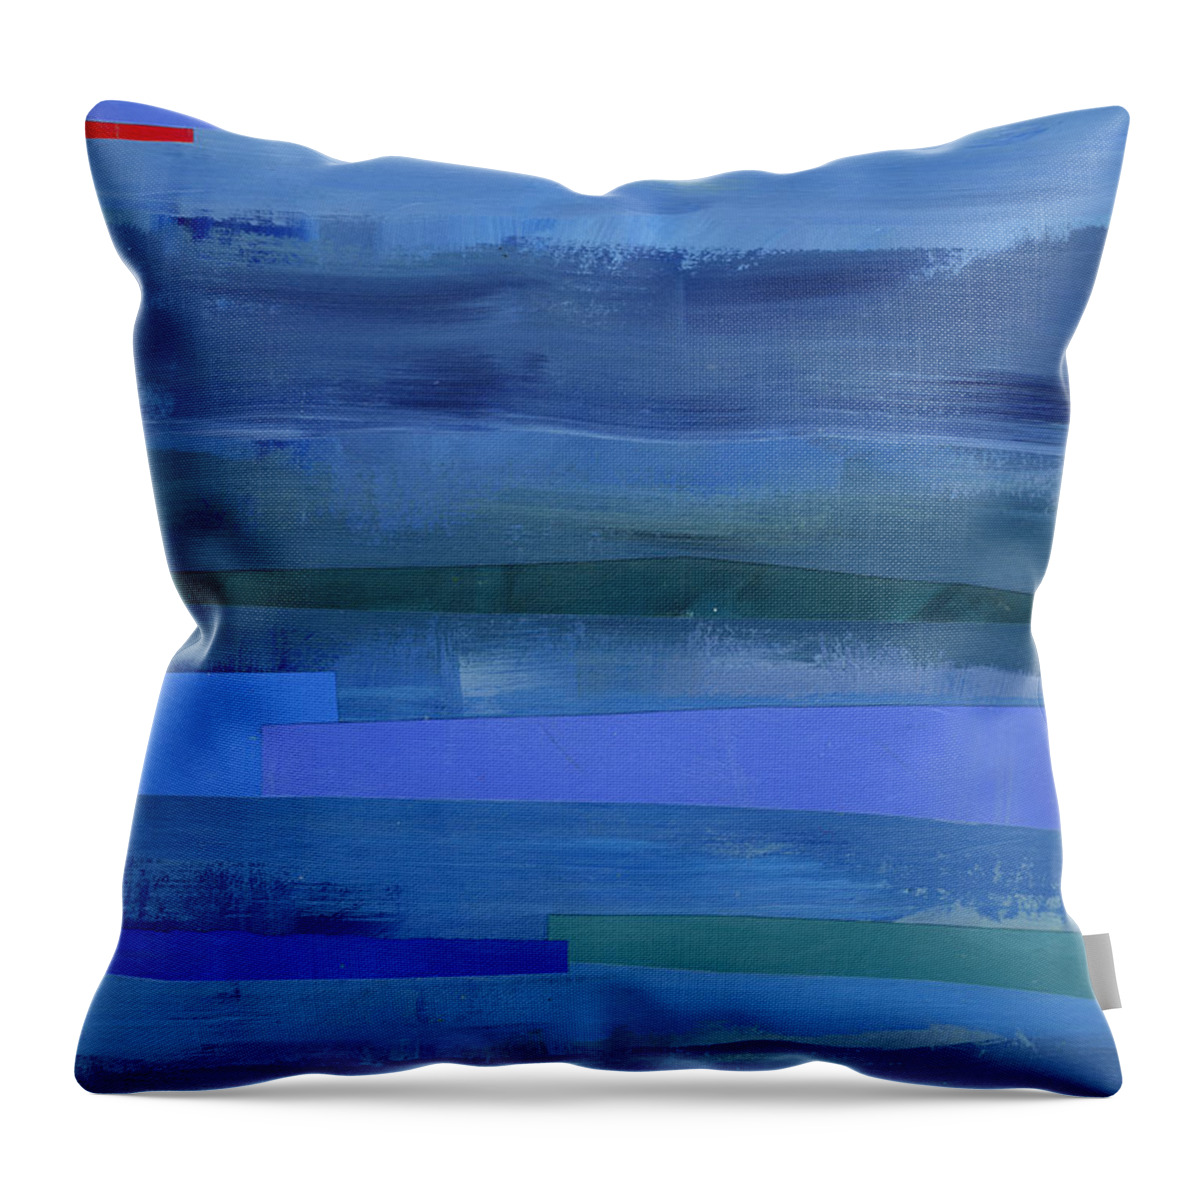 Abstract Art Throw Pillow featuring the painting Blue Stripes 1 by Jane Davies